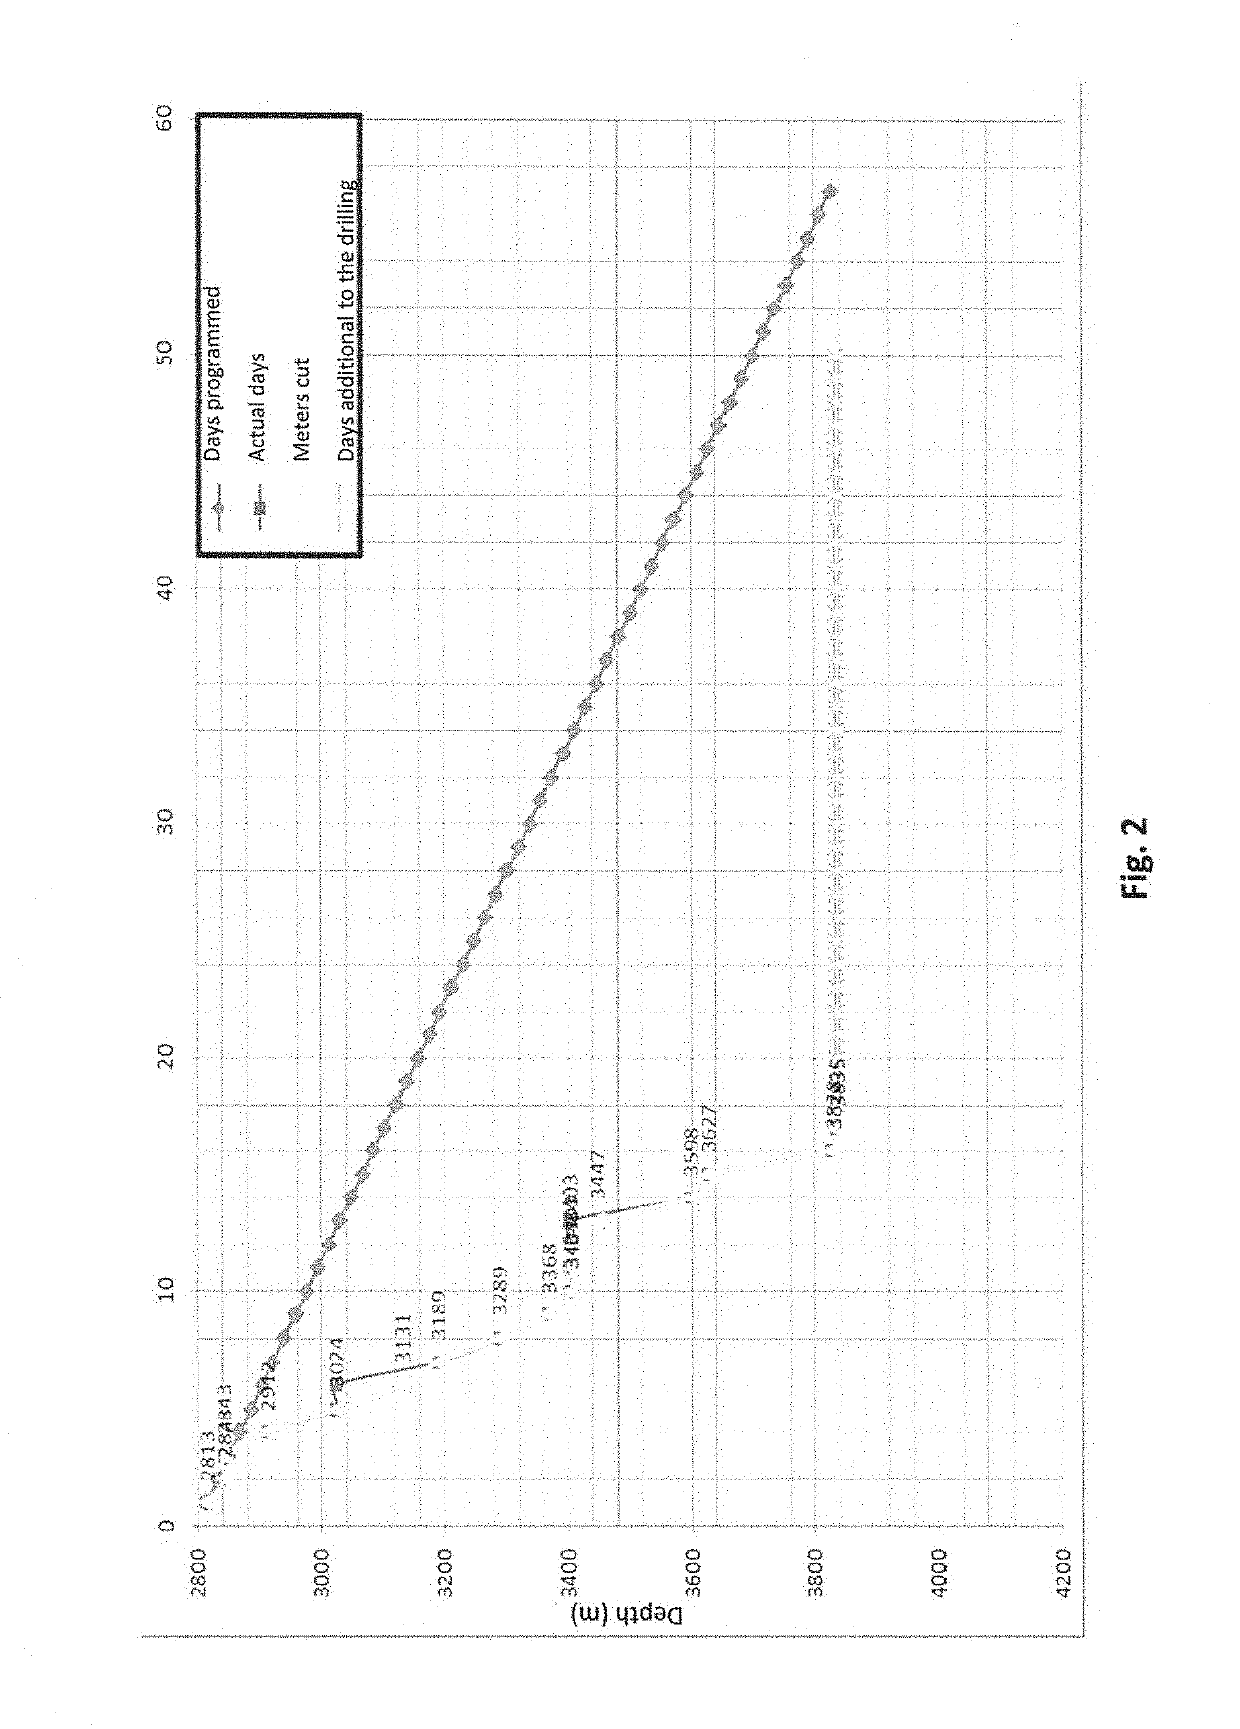 Method for forming a high-performance aqueous-phase polymer fluid and system for drilling well bores in low-gradient formations